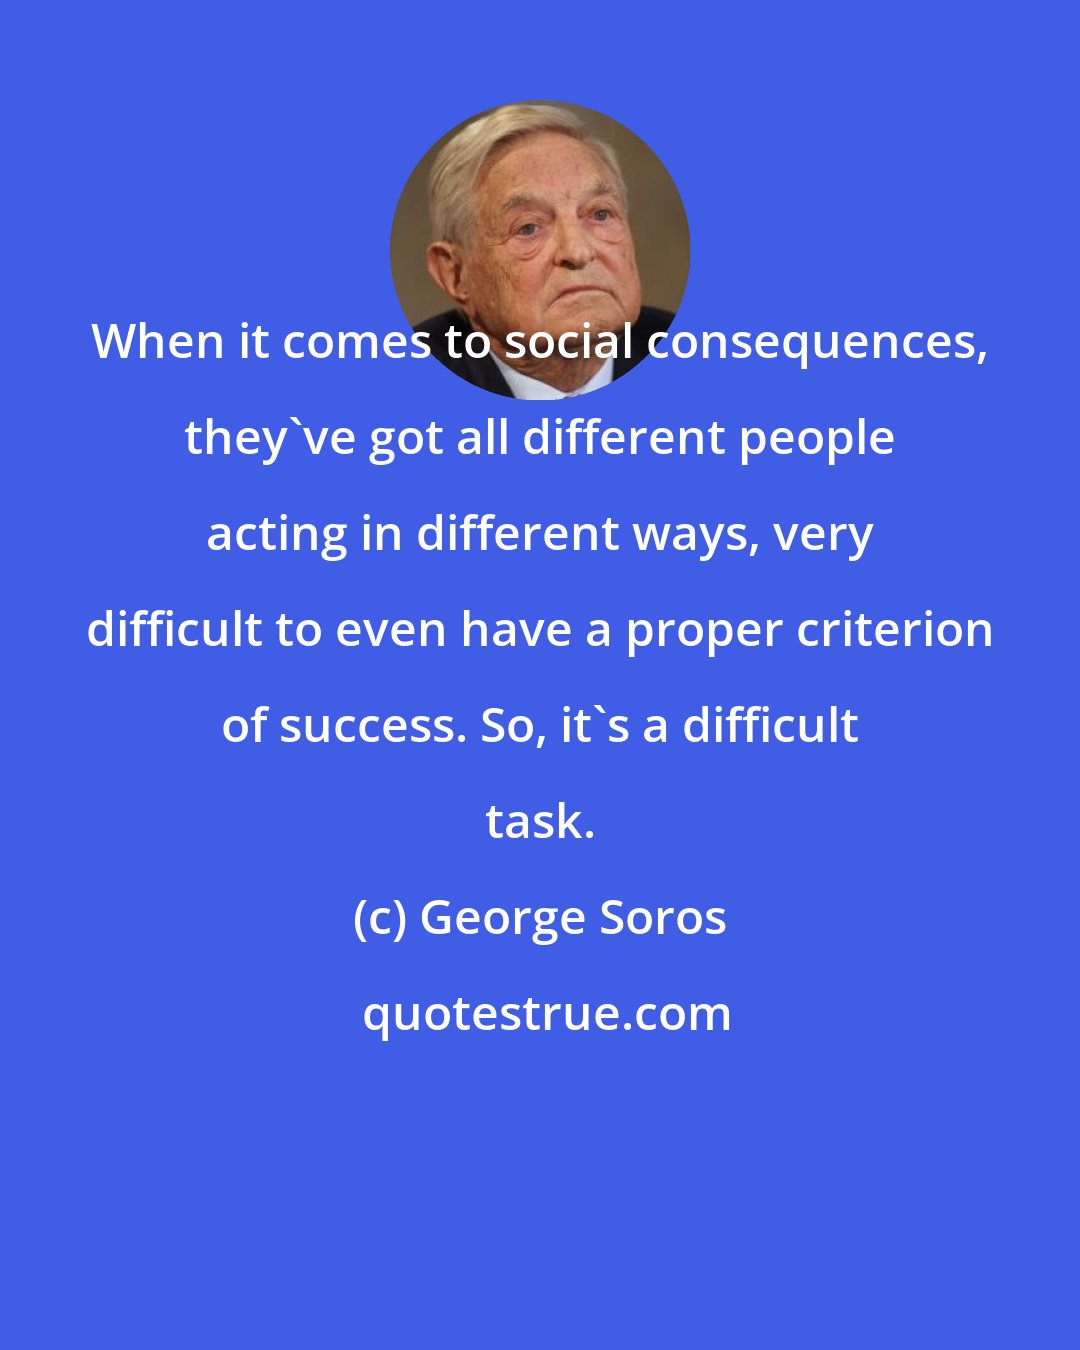 George Soros: When it comes to social consequences, they've got all different people acting in different ways, very difficult to even have a proper criterion of success. So, it's a difficult task.